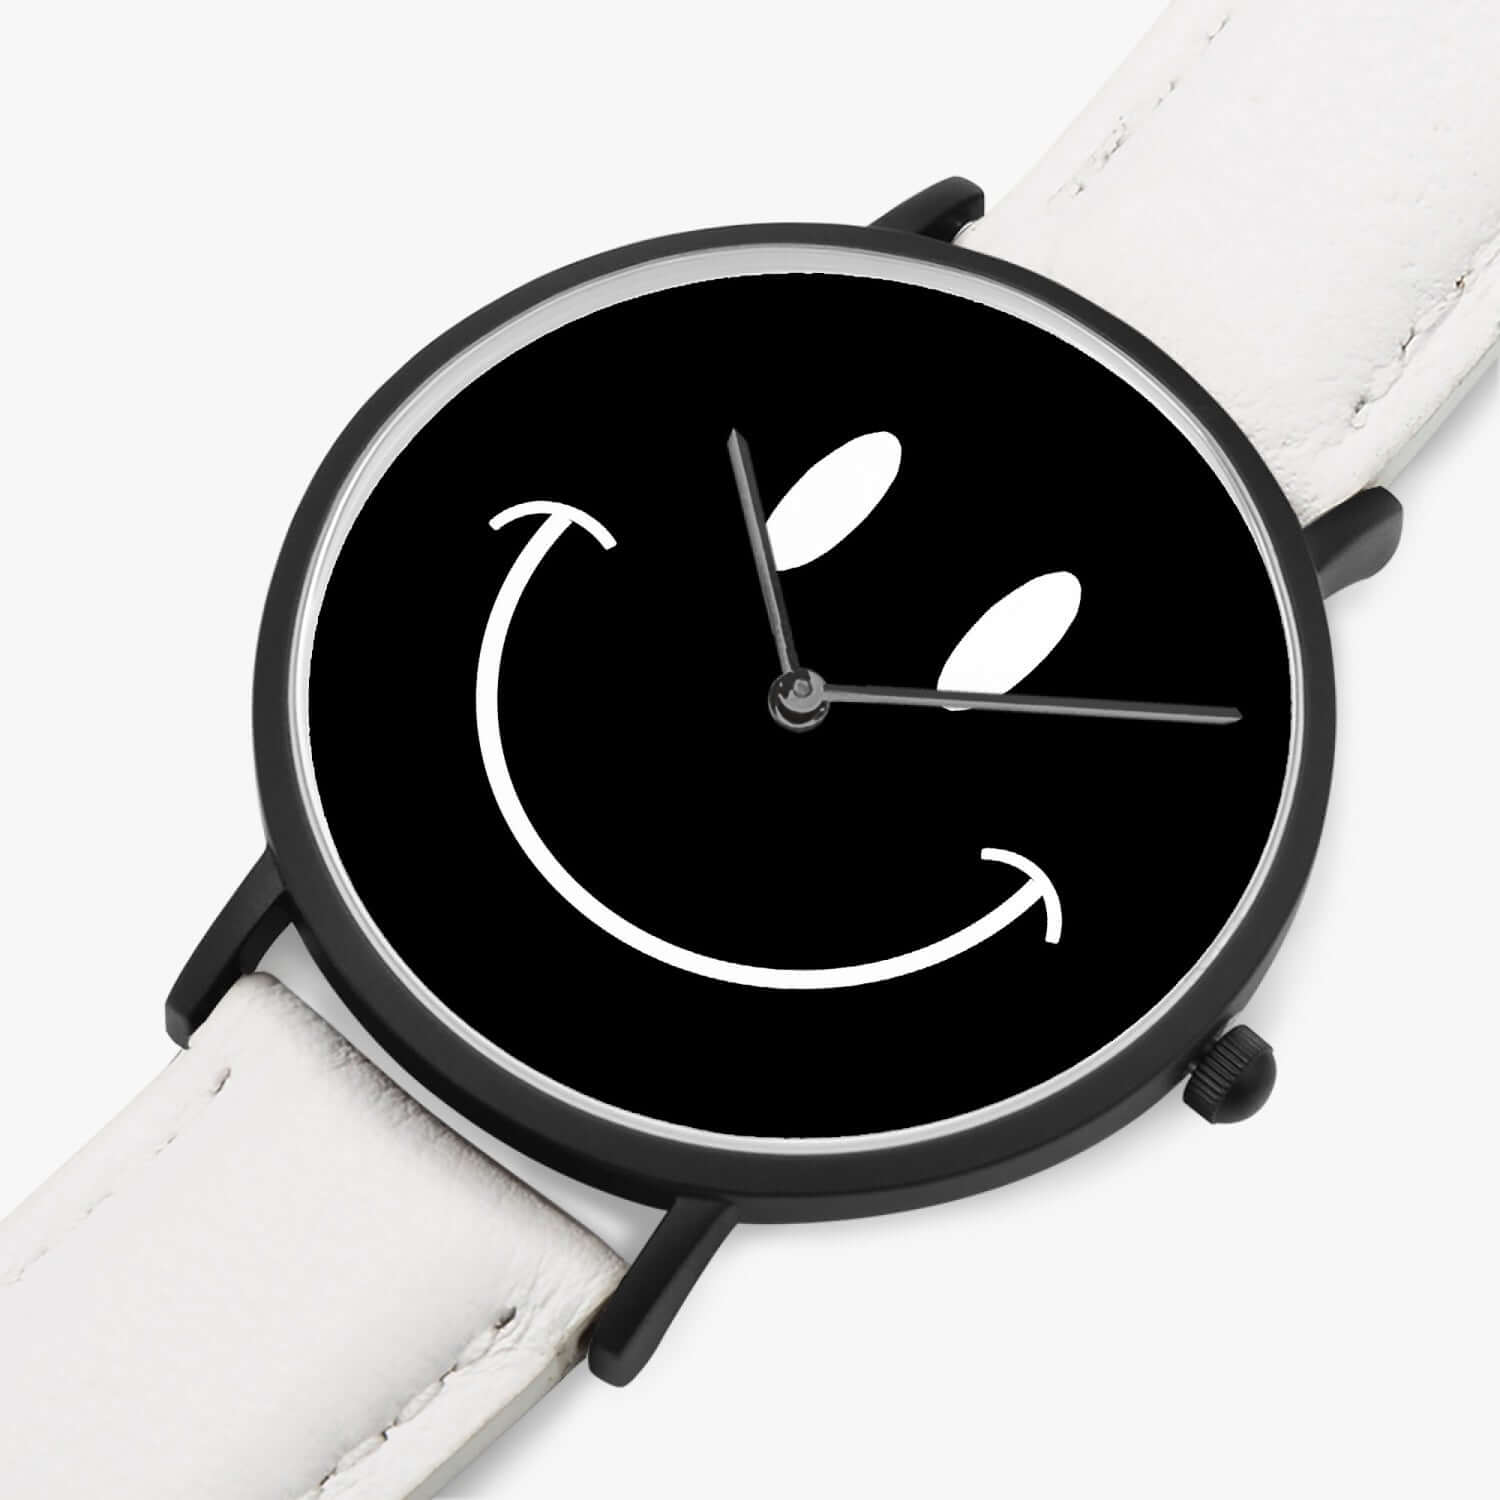 Be Happy Black Smiley Face Ultra-Thin Leather Strap Quartz Watch - The Kindness Cause Graduation Gifts